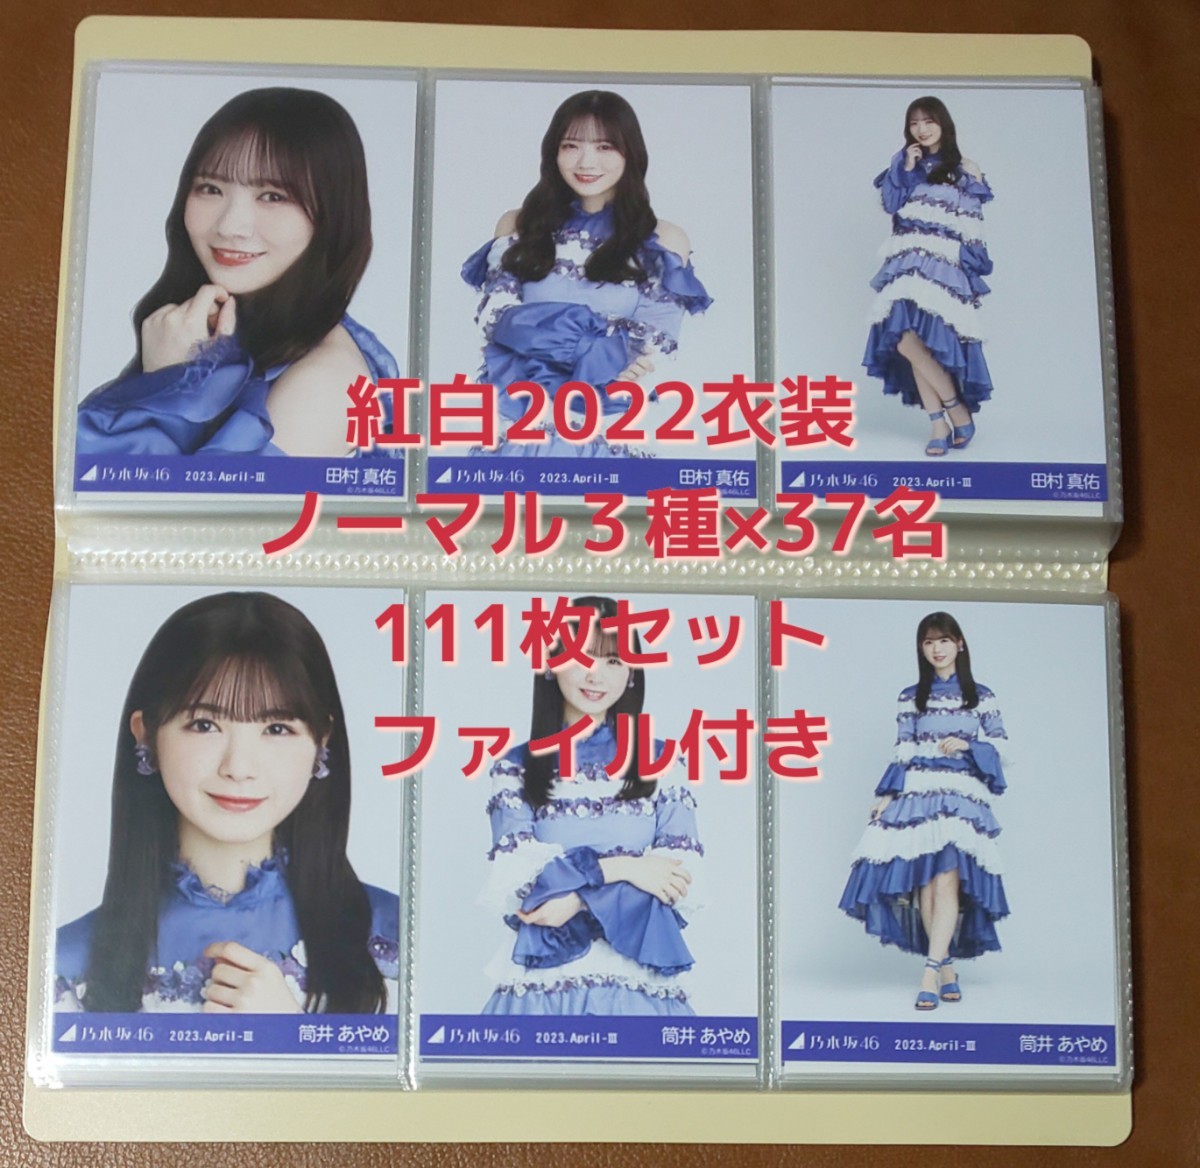  Nogizaka 46. white 2022 costume life photograph 2023.April-Ⅲ. tree kore normal 37 name ×3 kind 111 pieces set file attaching 